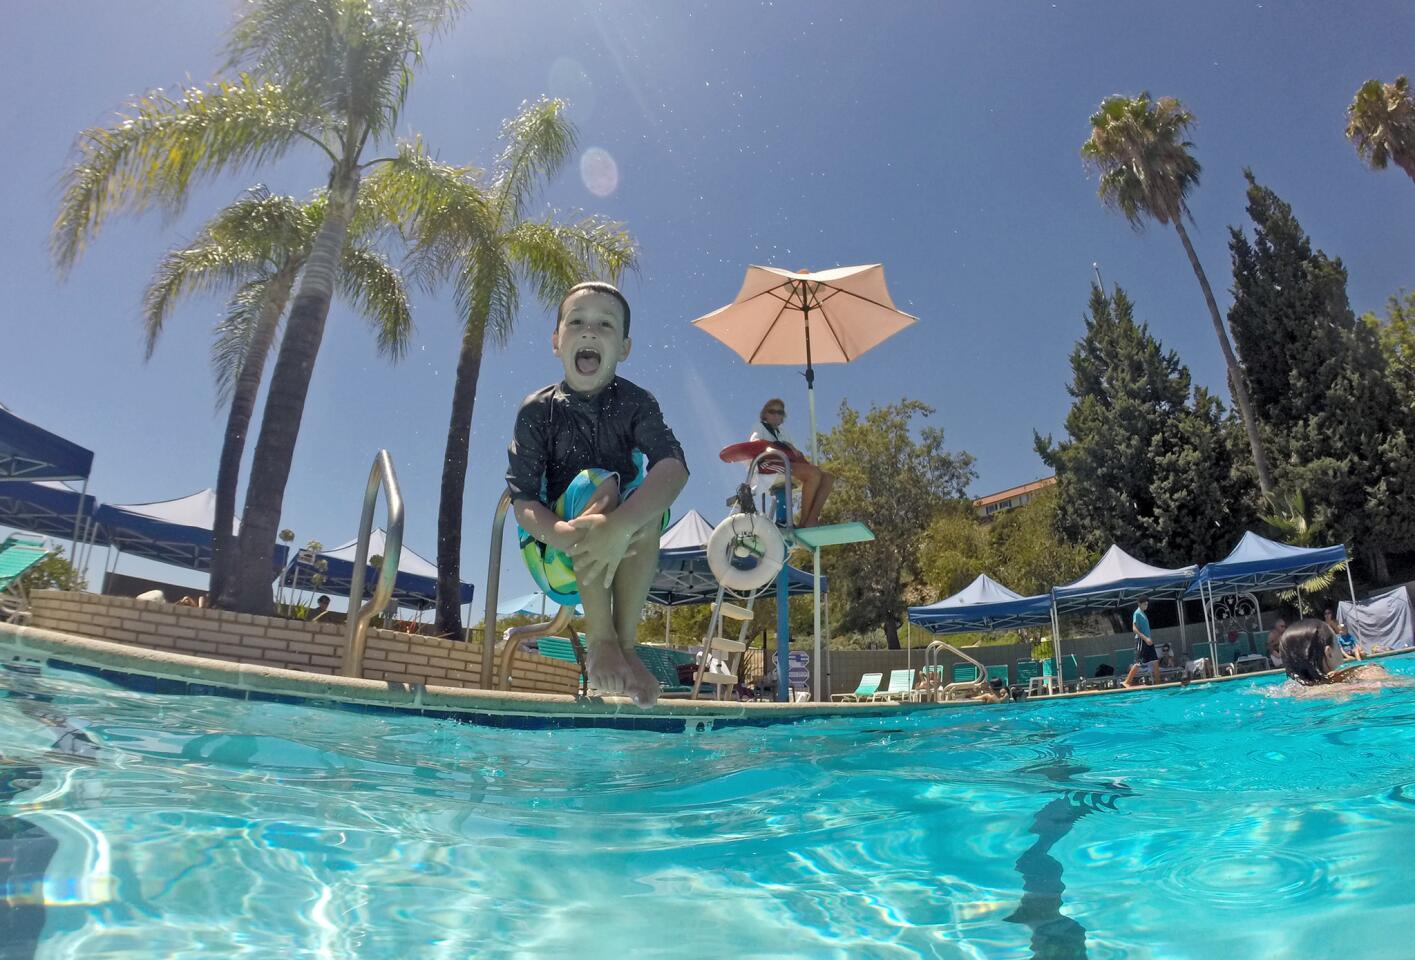 Photo Gallery: Pool keeps children cool as temperatures soar